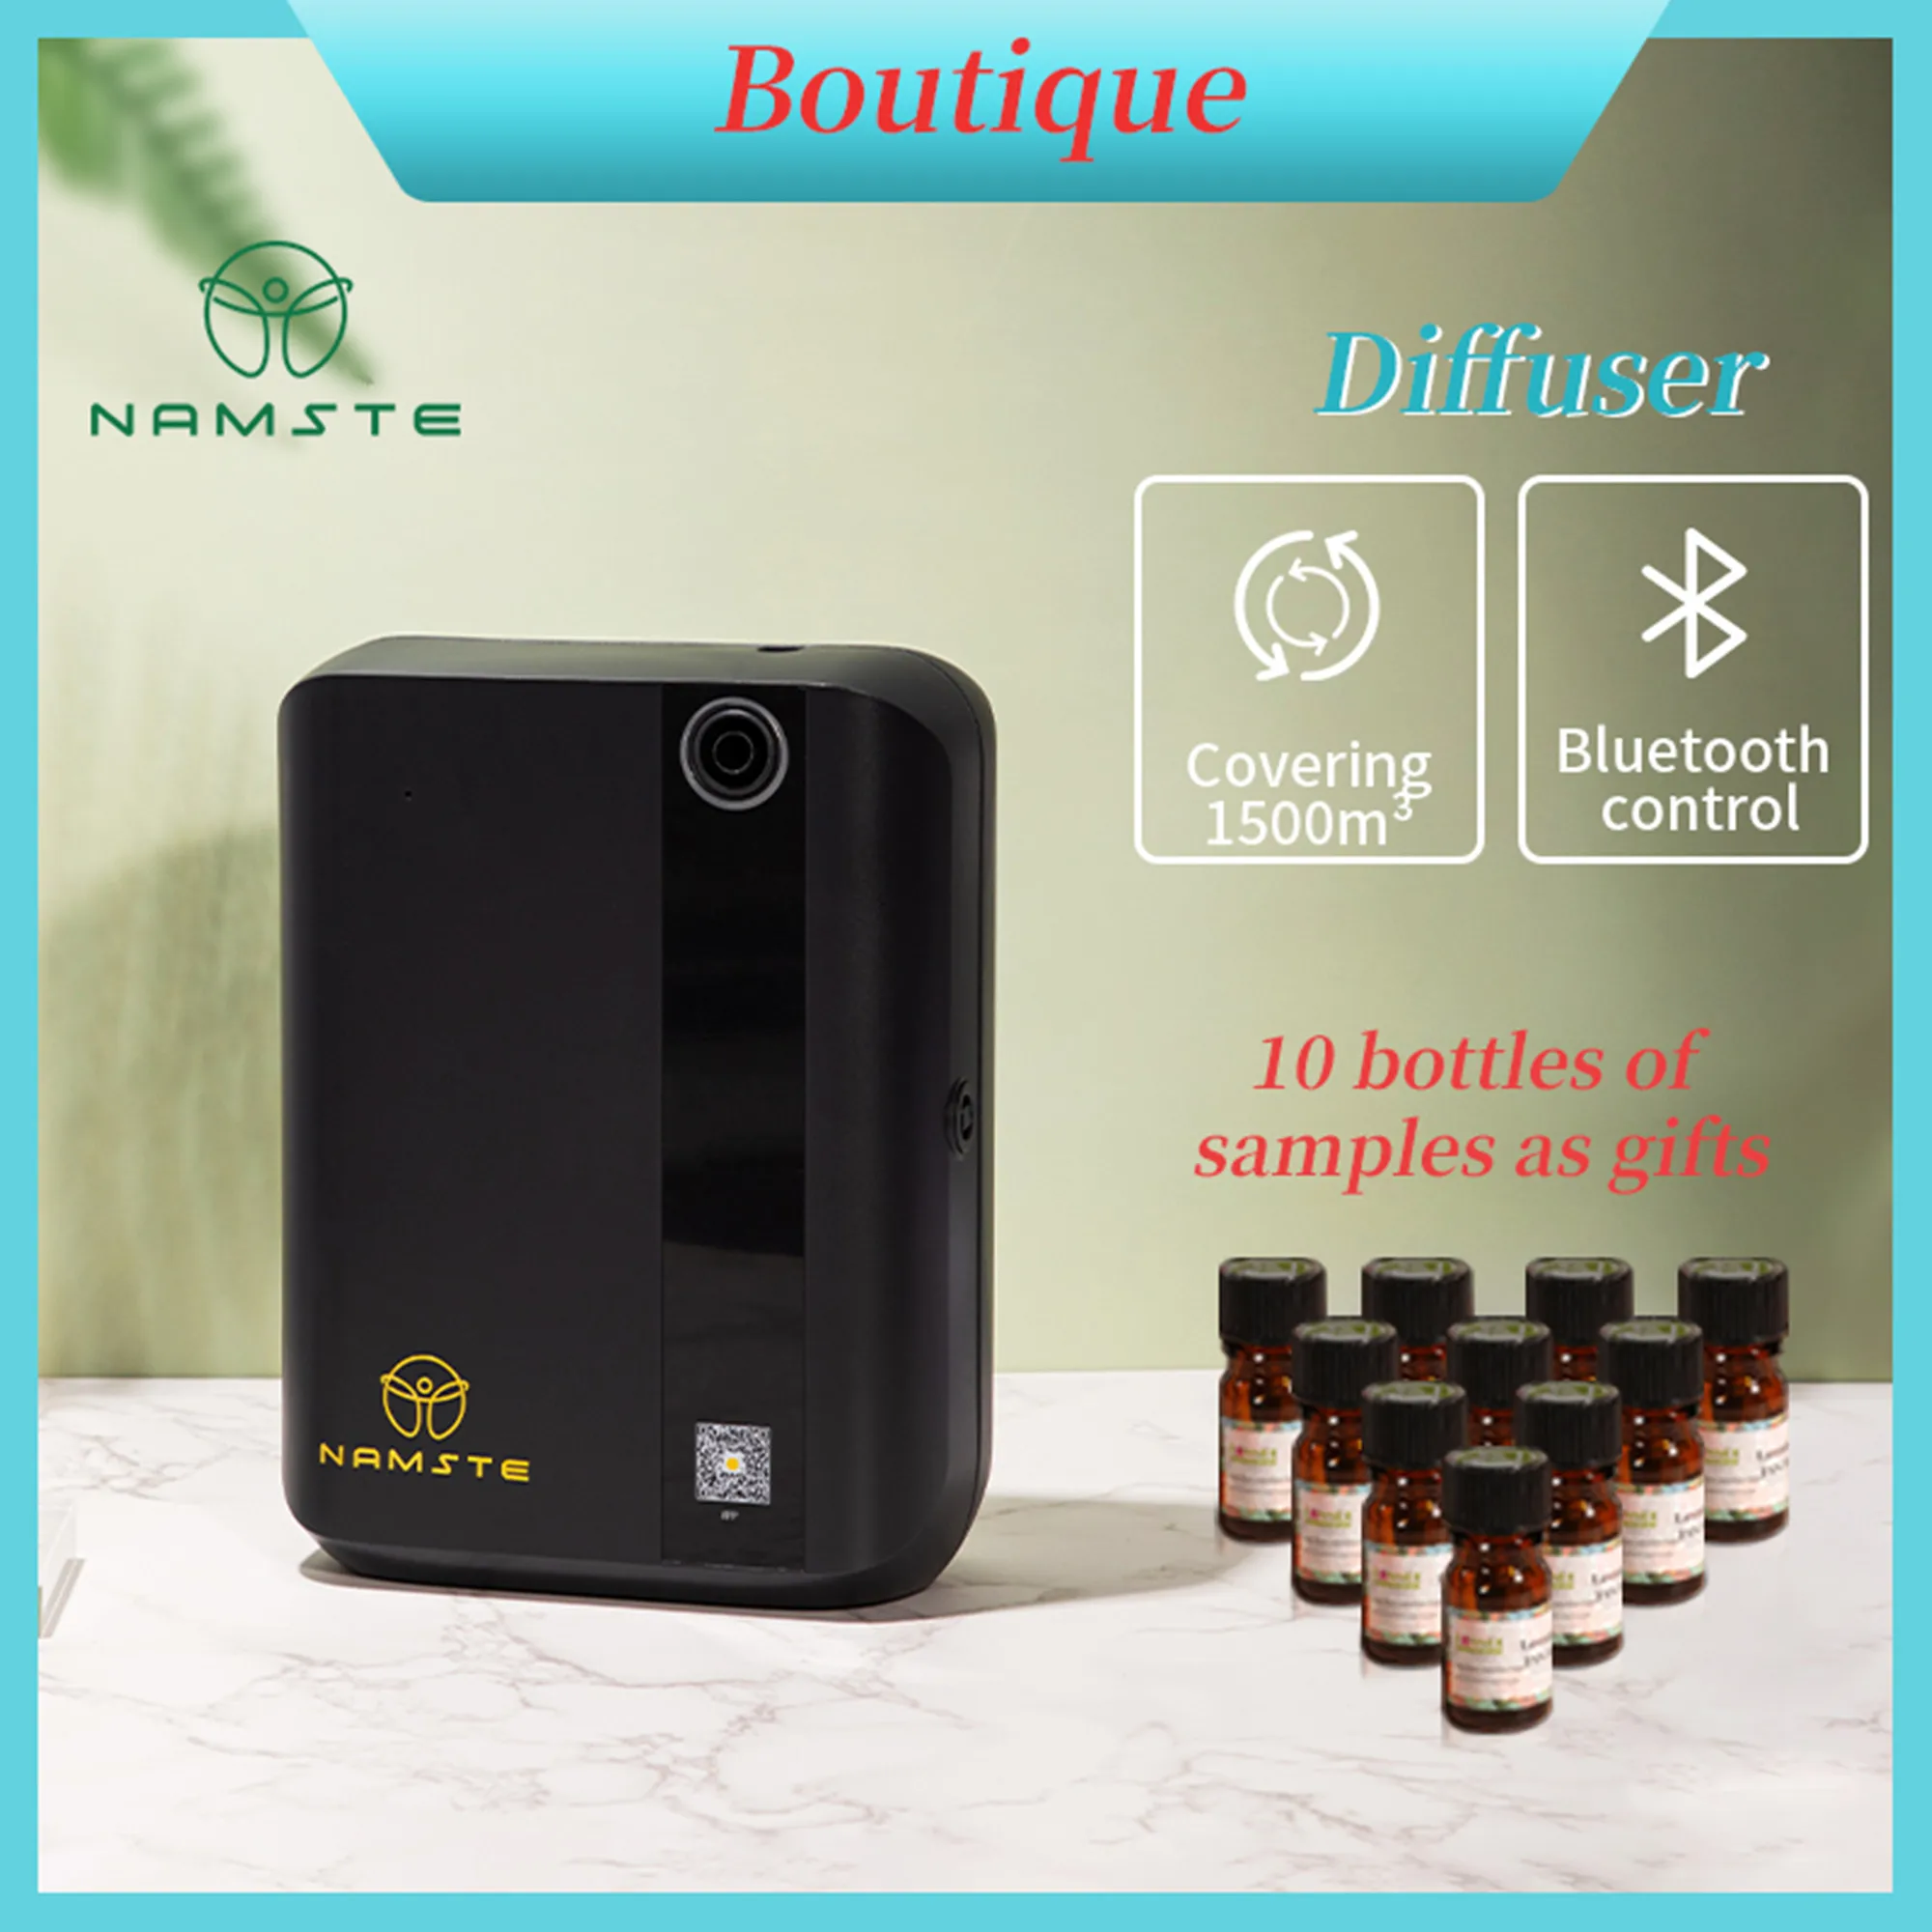 NAMSTE Home Aroma Diffuser1000-1500m³ Hvac Essential Oil Diffuser Room Fragrance Air Freshener Electric Aromatic Oasis Bluetooth